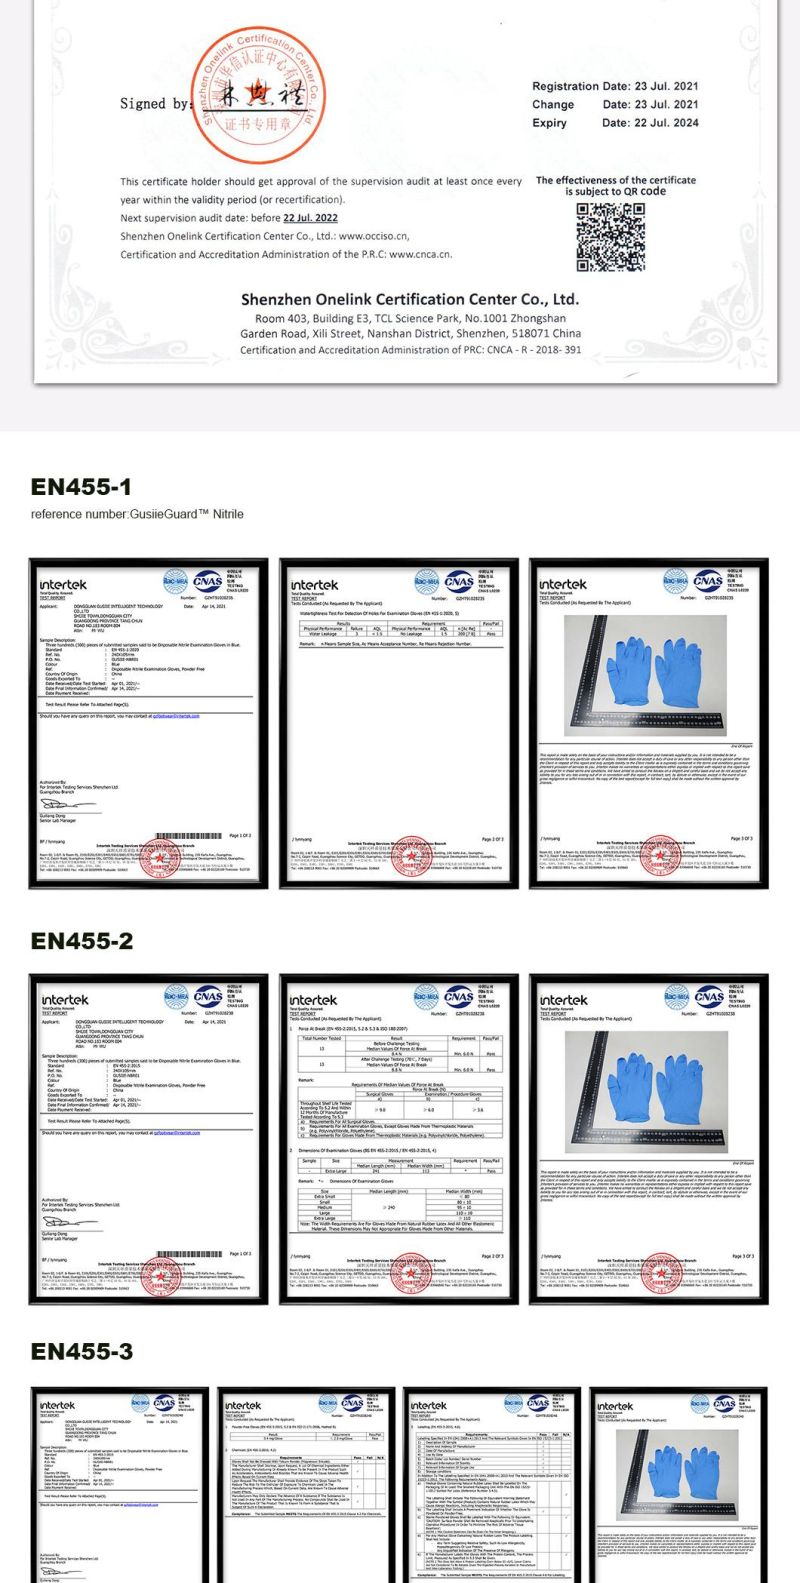 Gusiie Disposable Medical Safety Exam Blue Nitrile Large Gloves